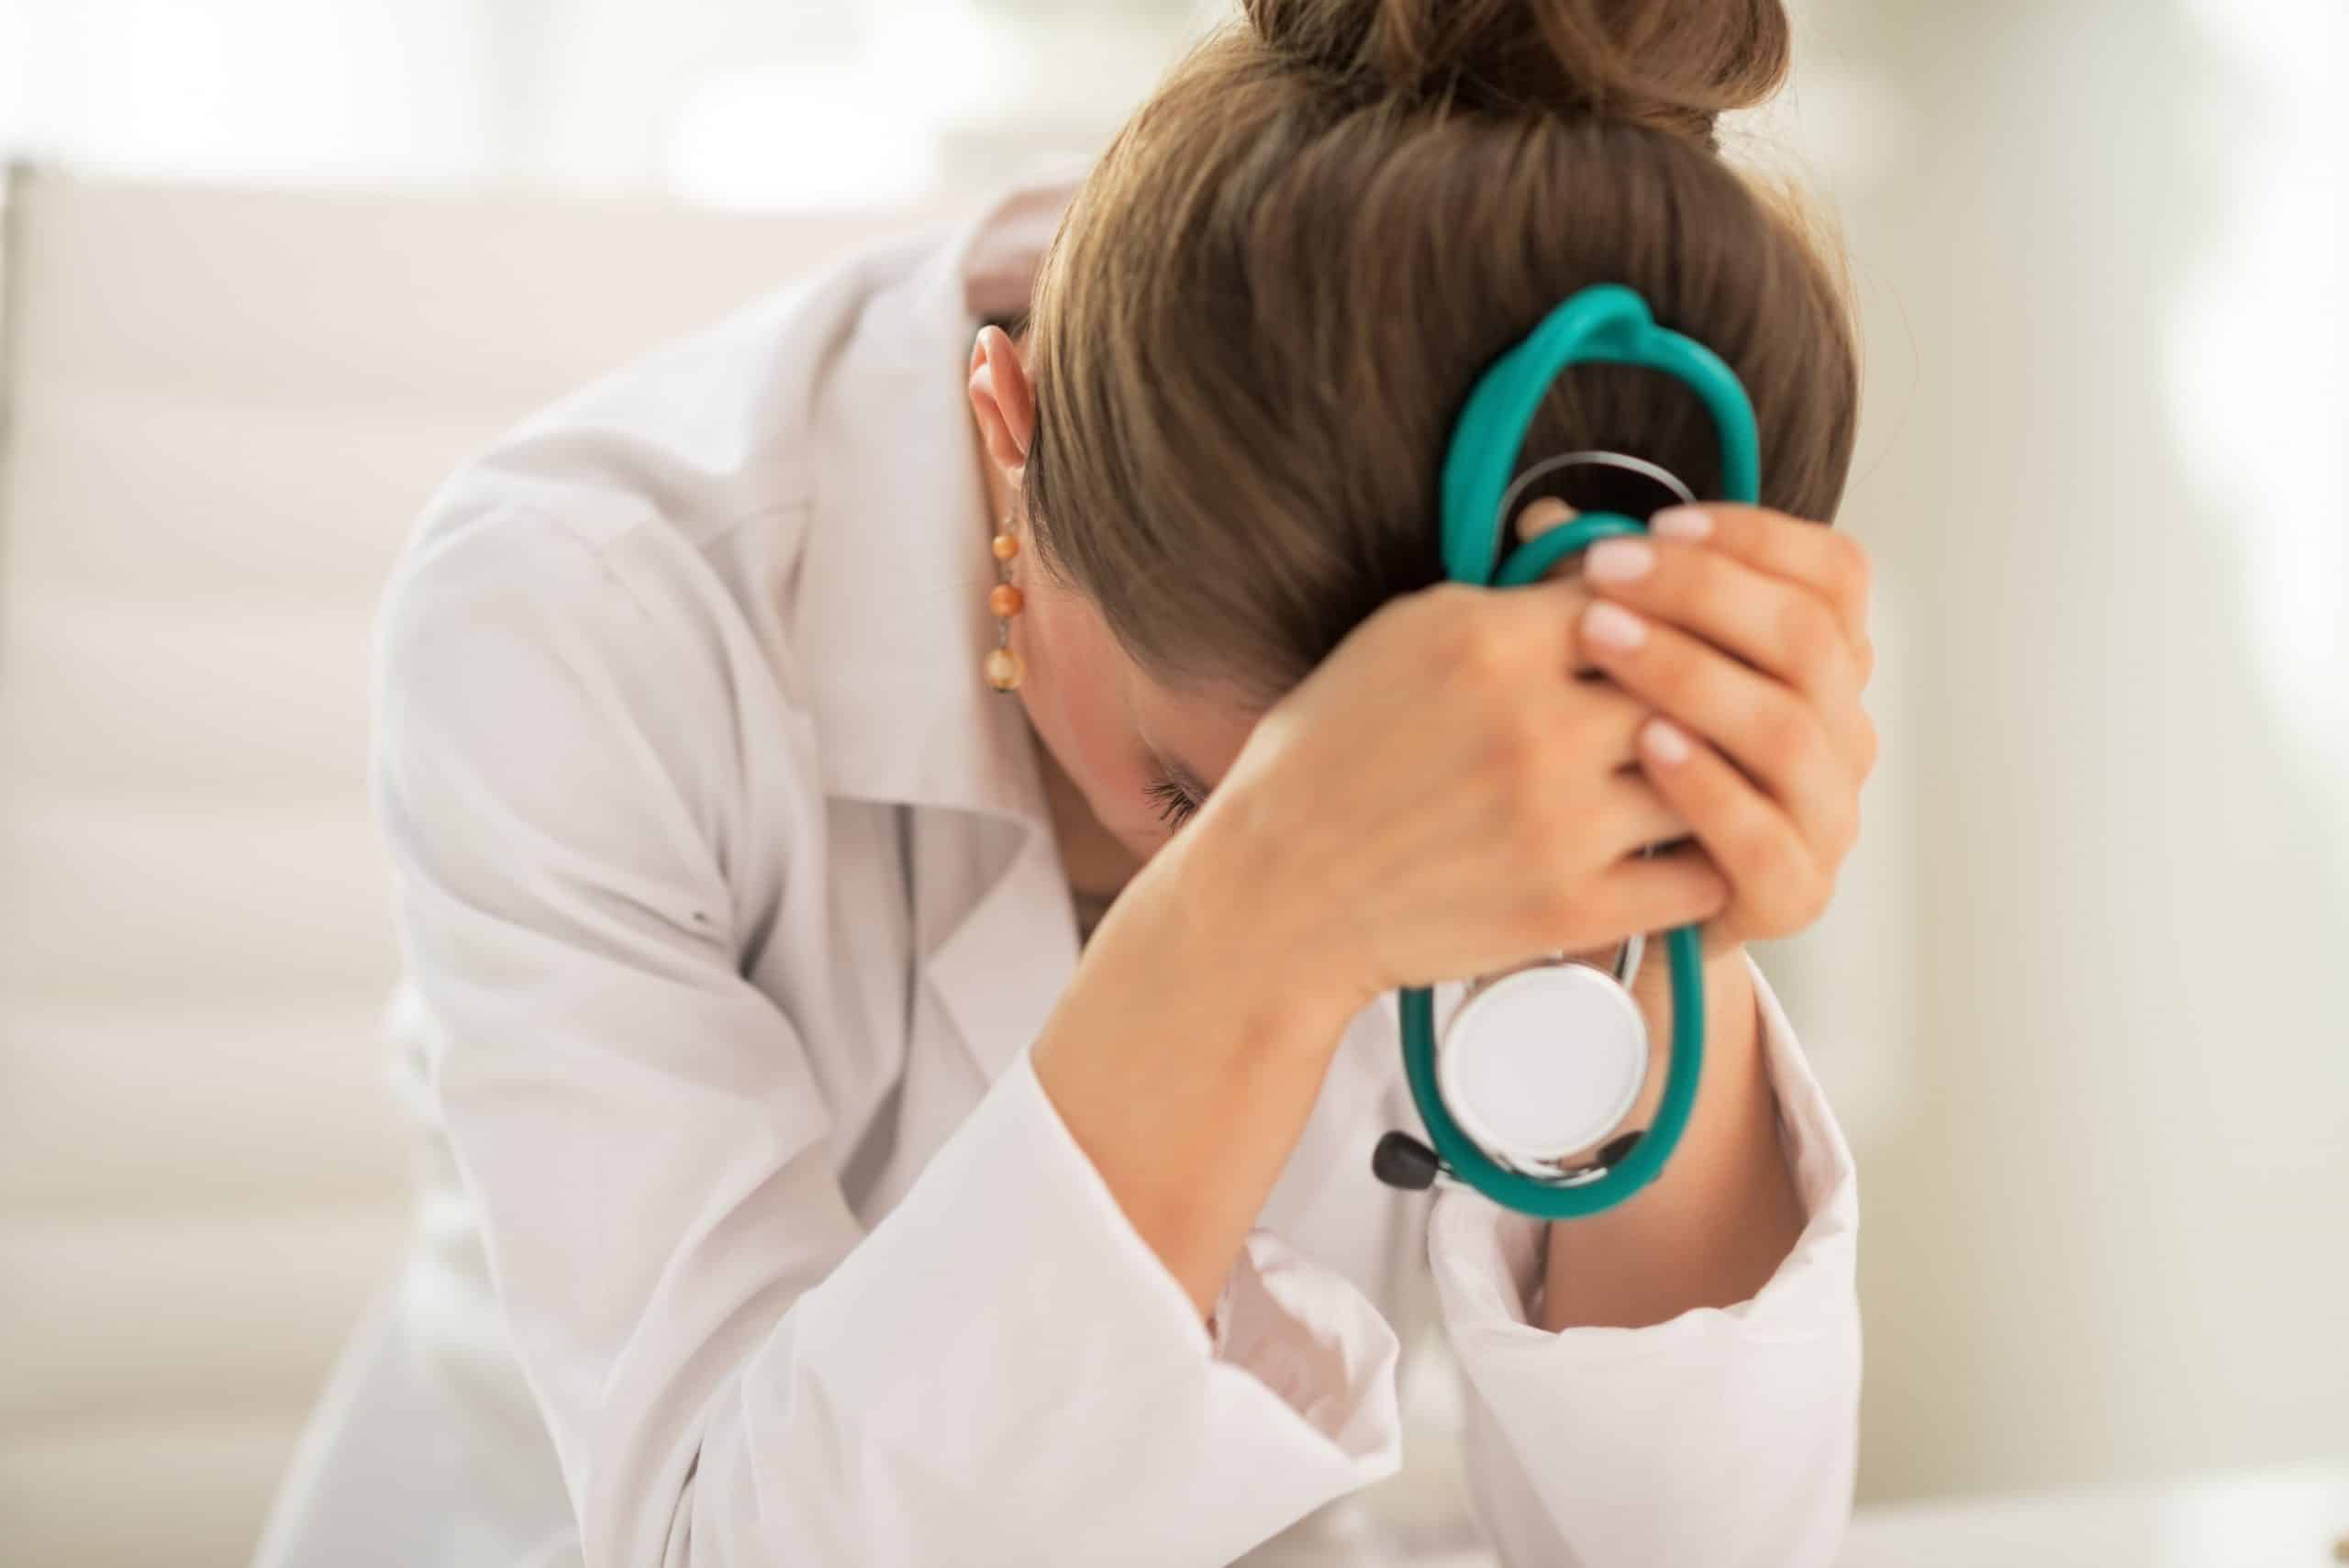 Pictured is a female physician who is head down in her hands while holding a teal green stethoscope. She apprears to be distressed and miserable. This photo is featured on the Passive Income MD blog, where we have featured The Physician Philosopher in a blog post titled, "I Am a Doctor and I Hate My Job."